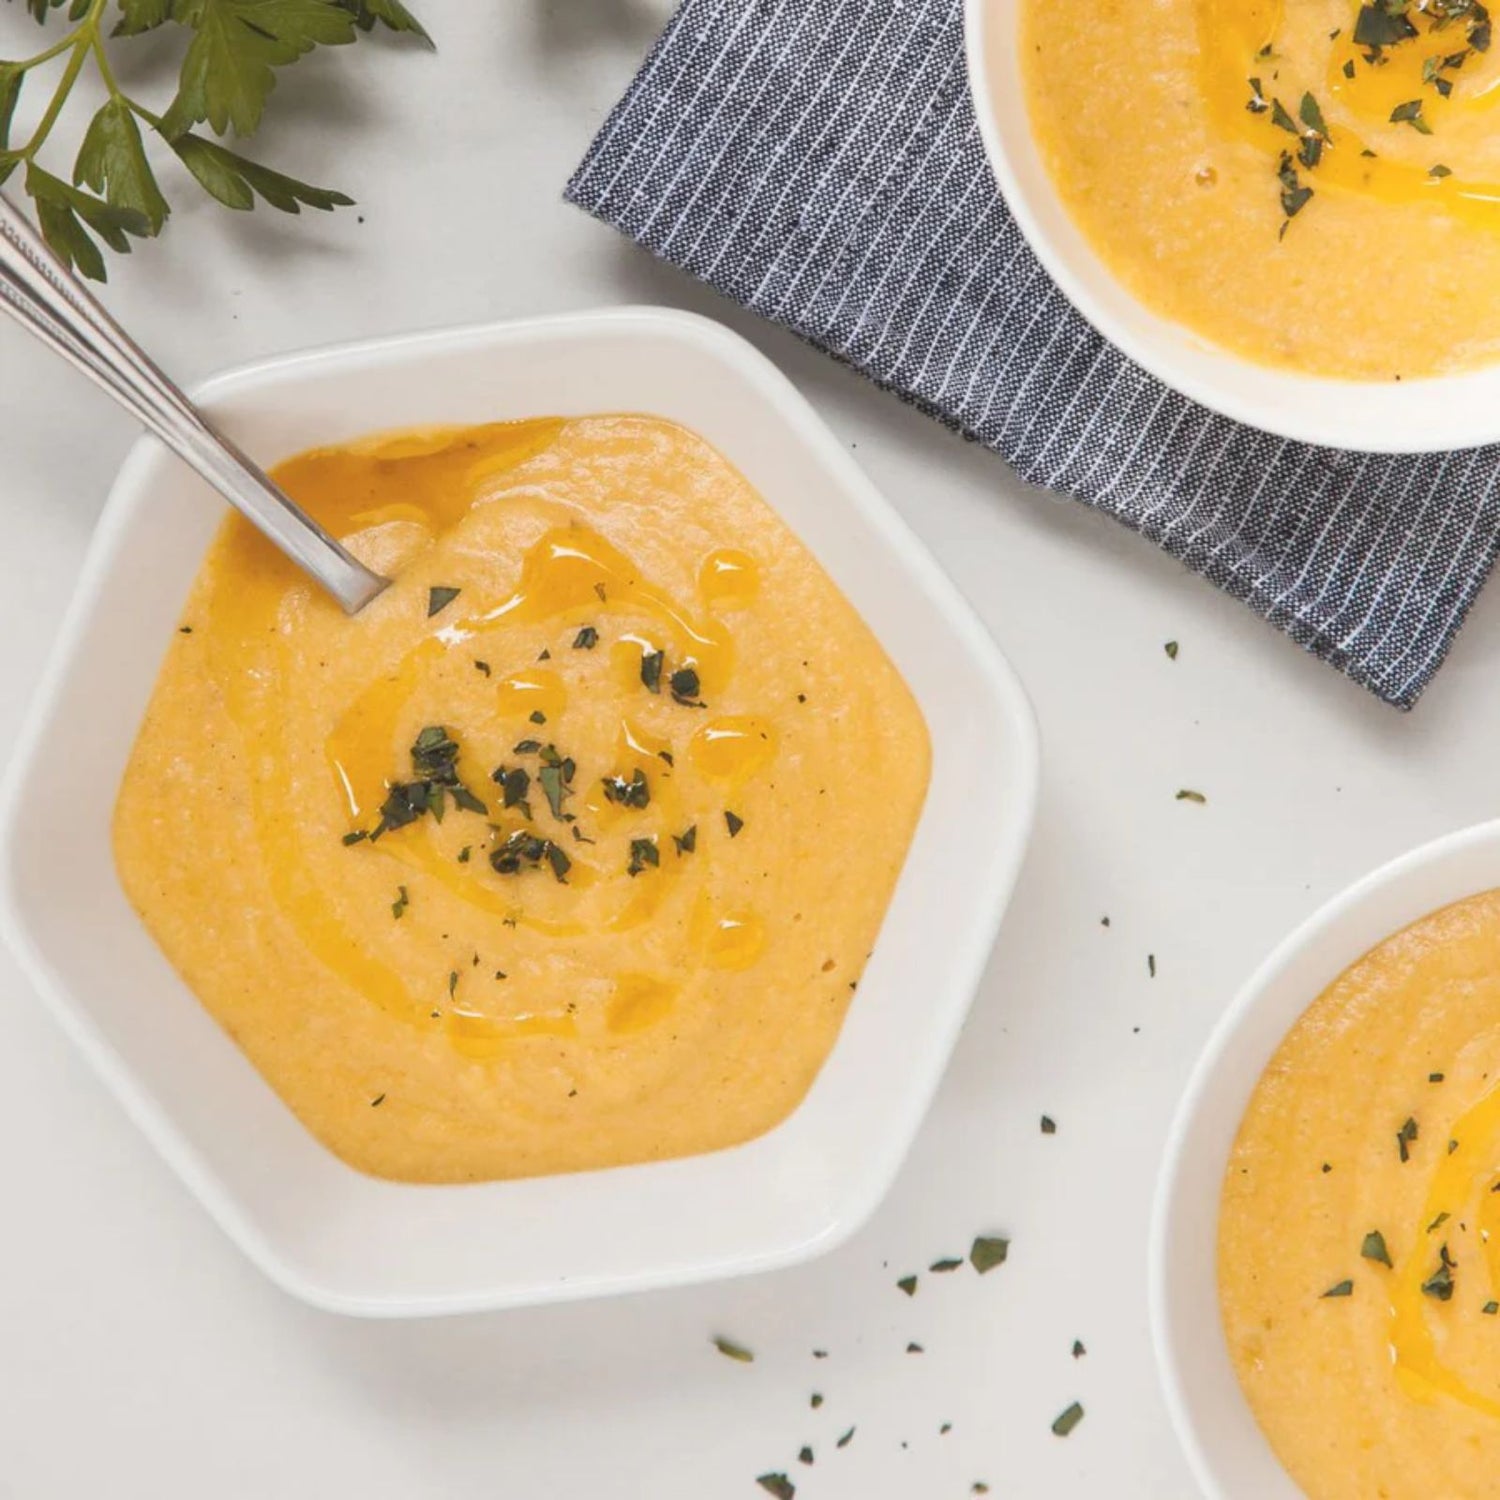 Winter squash soup in a china bowl